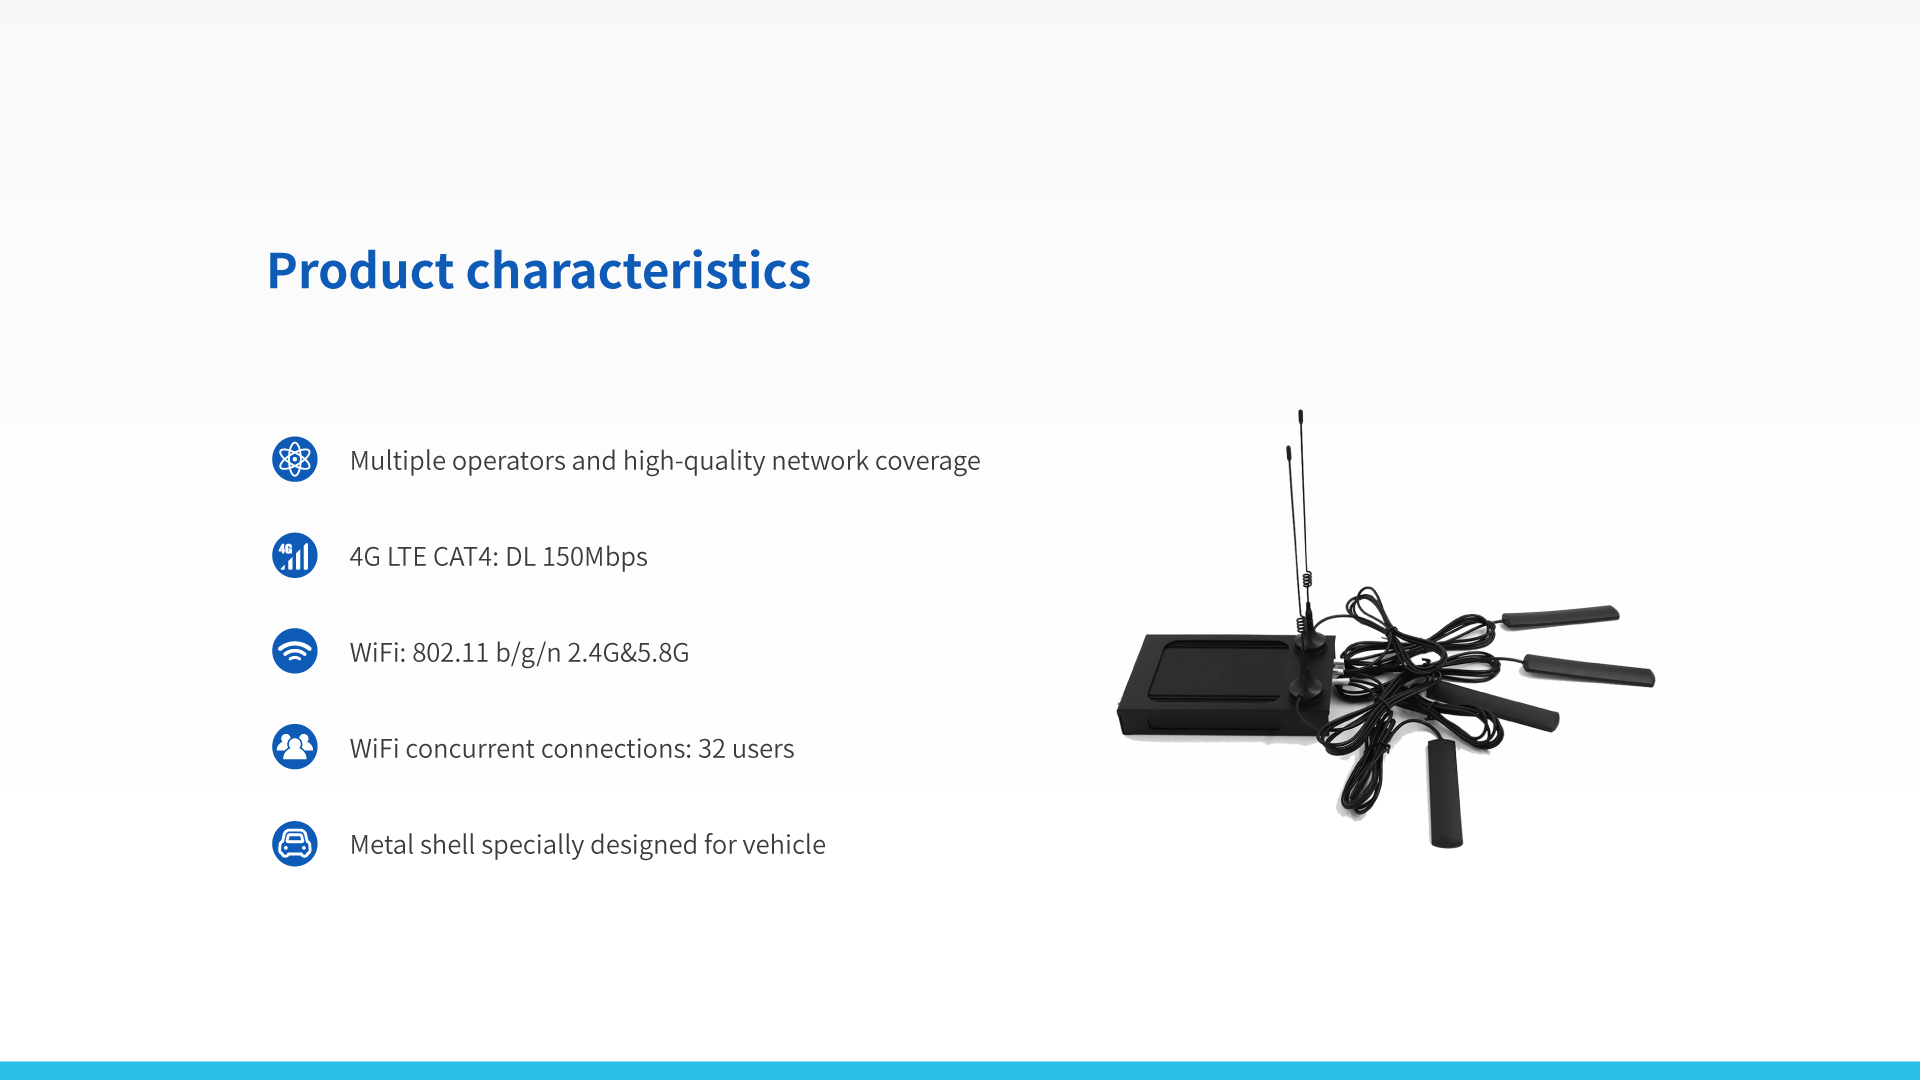 In-Vehicle 4G Wireless Router TR120